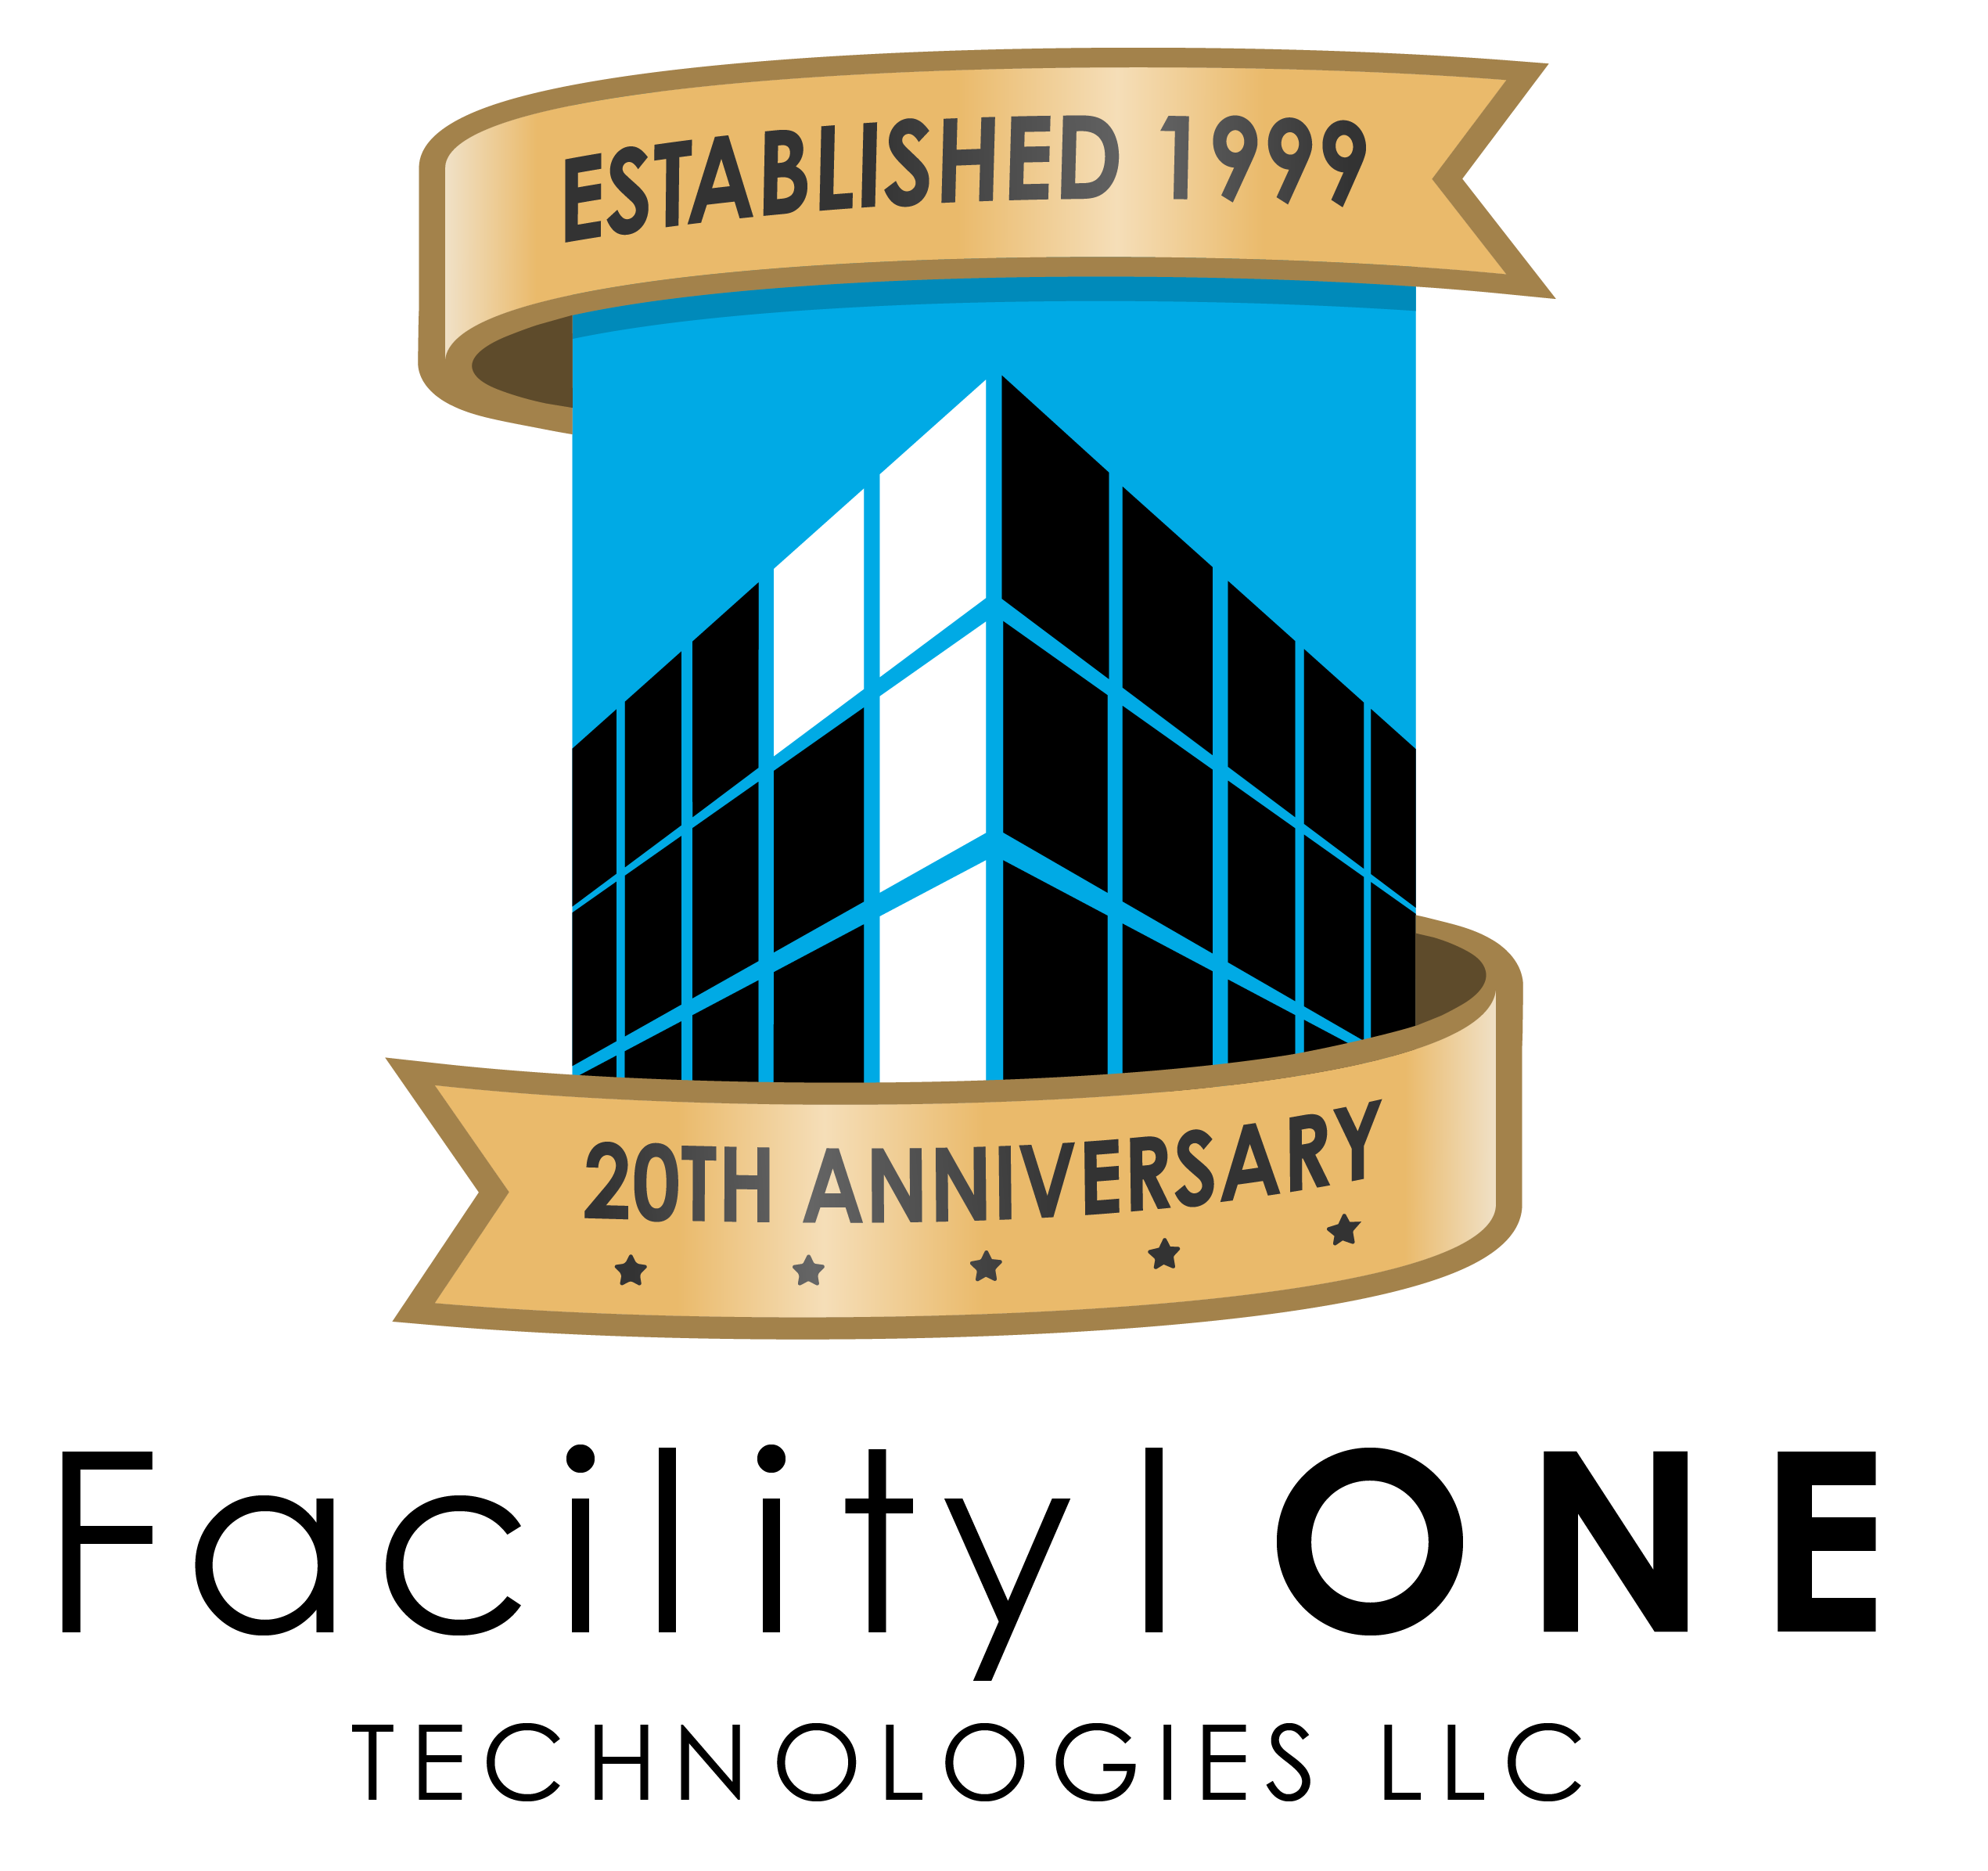 FacilityONE® Technologies unveiled a new logo this month as the company celebrates its 20th Anniversary.